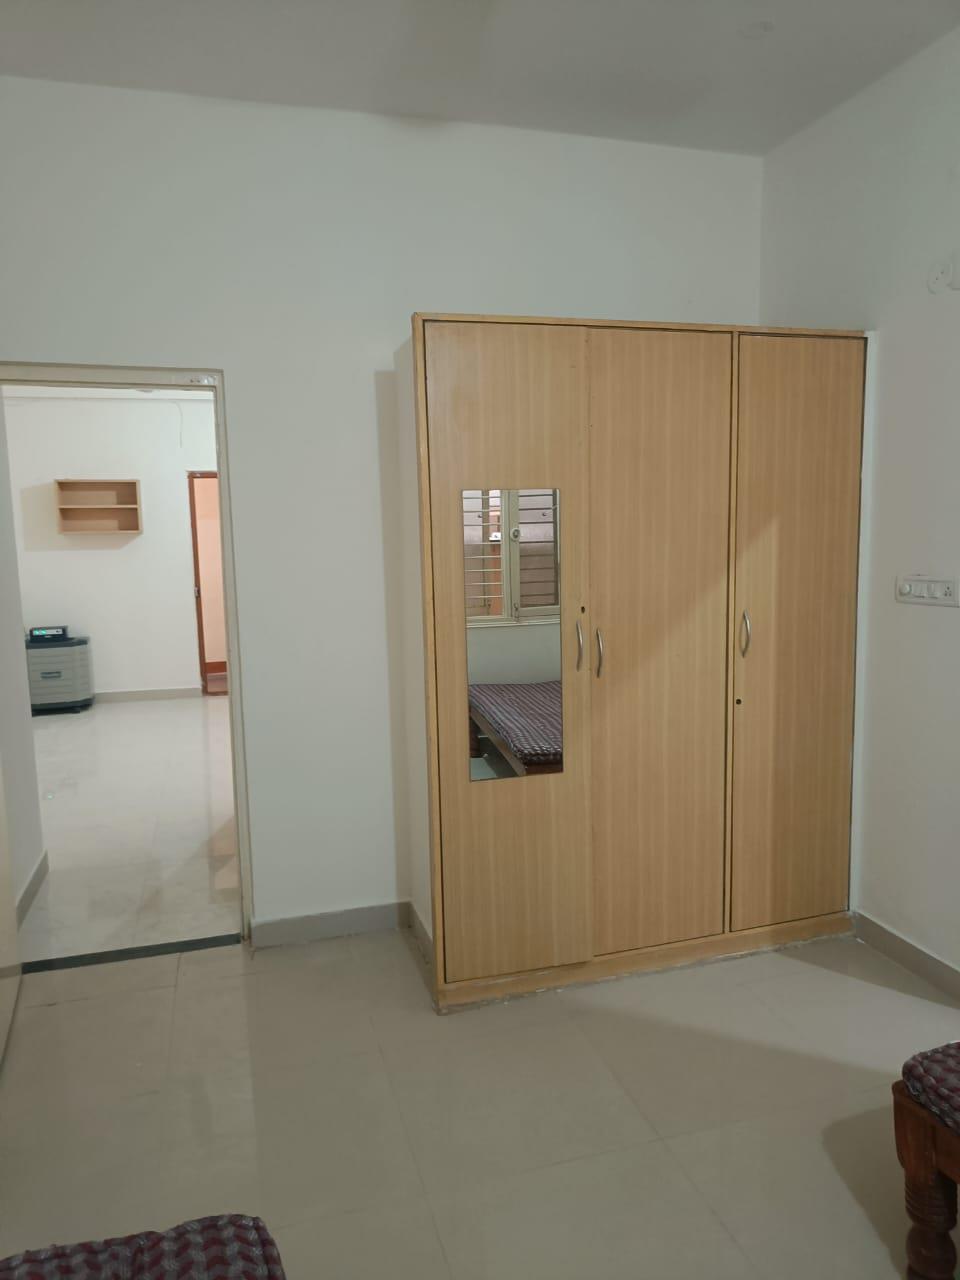 1 BHK Independent House for Lease Only at JAML2 - 1089 in Hebbal Kempapura